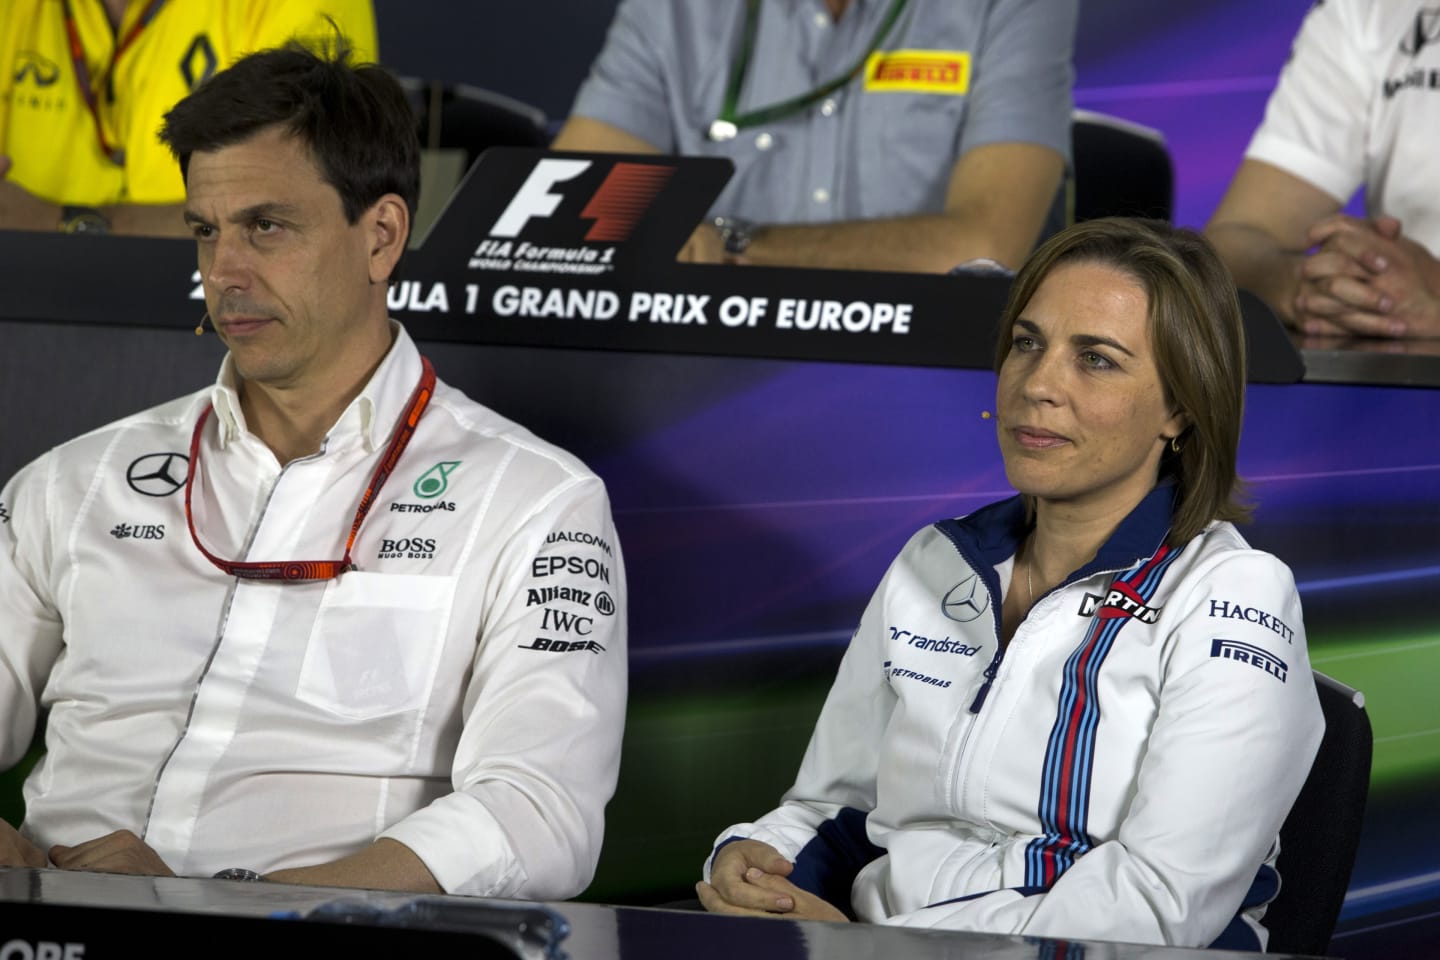 www.sutton-images.com

Toto Wolff (AUT) Mercedes AMG F1 Director of Motorsport and Claire Williams